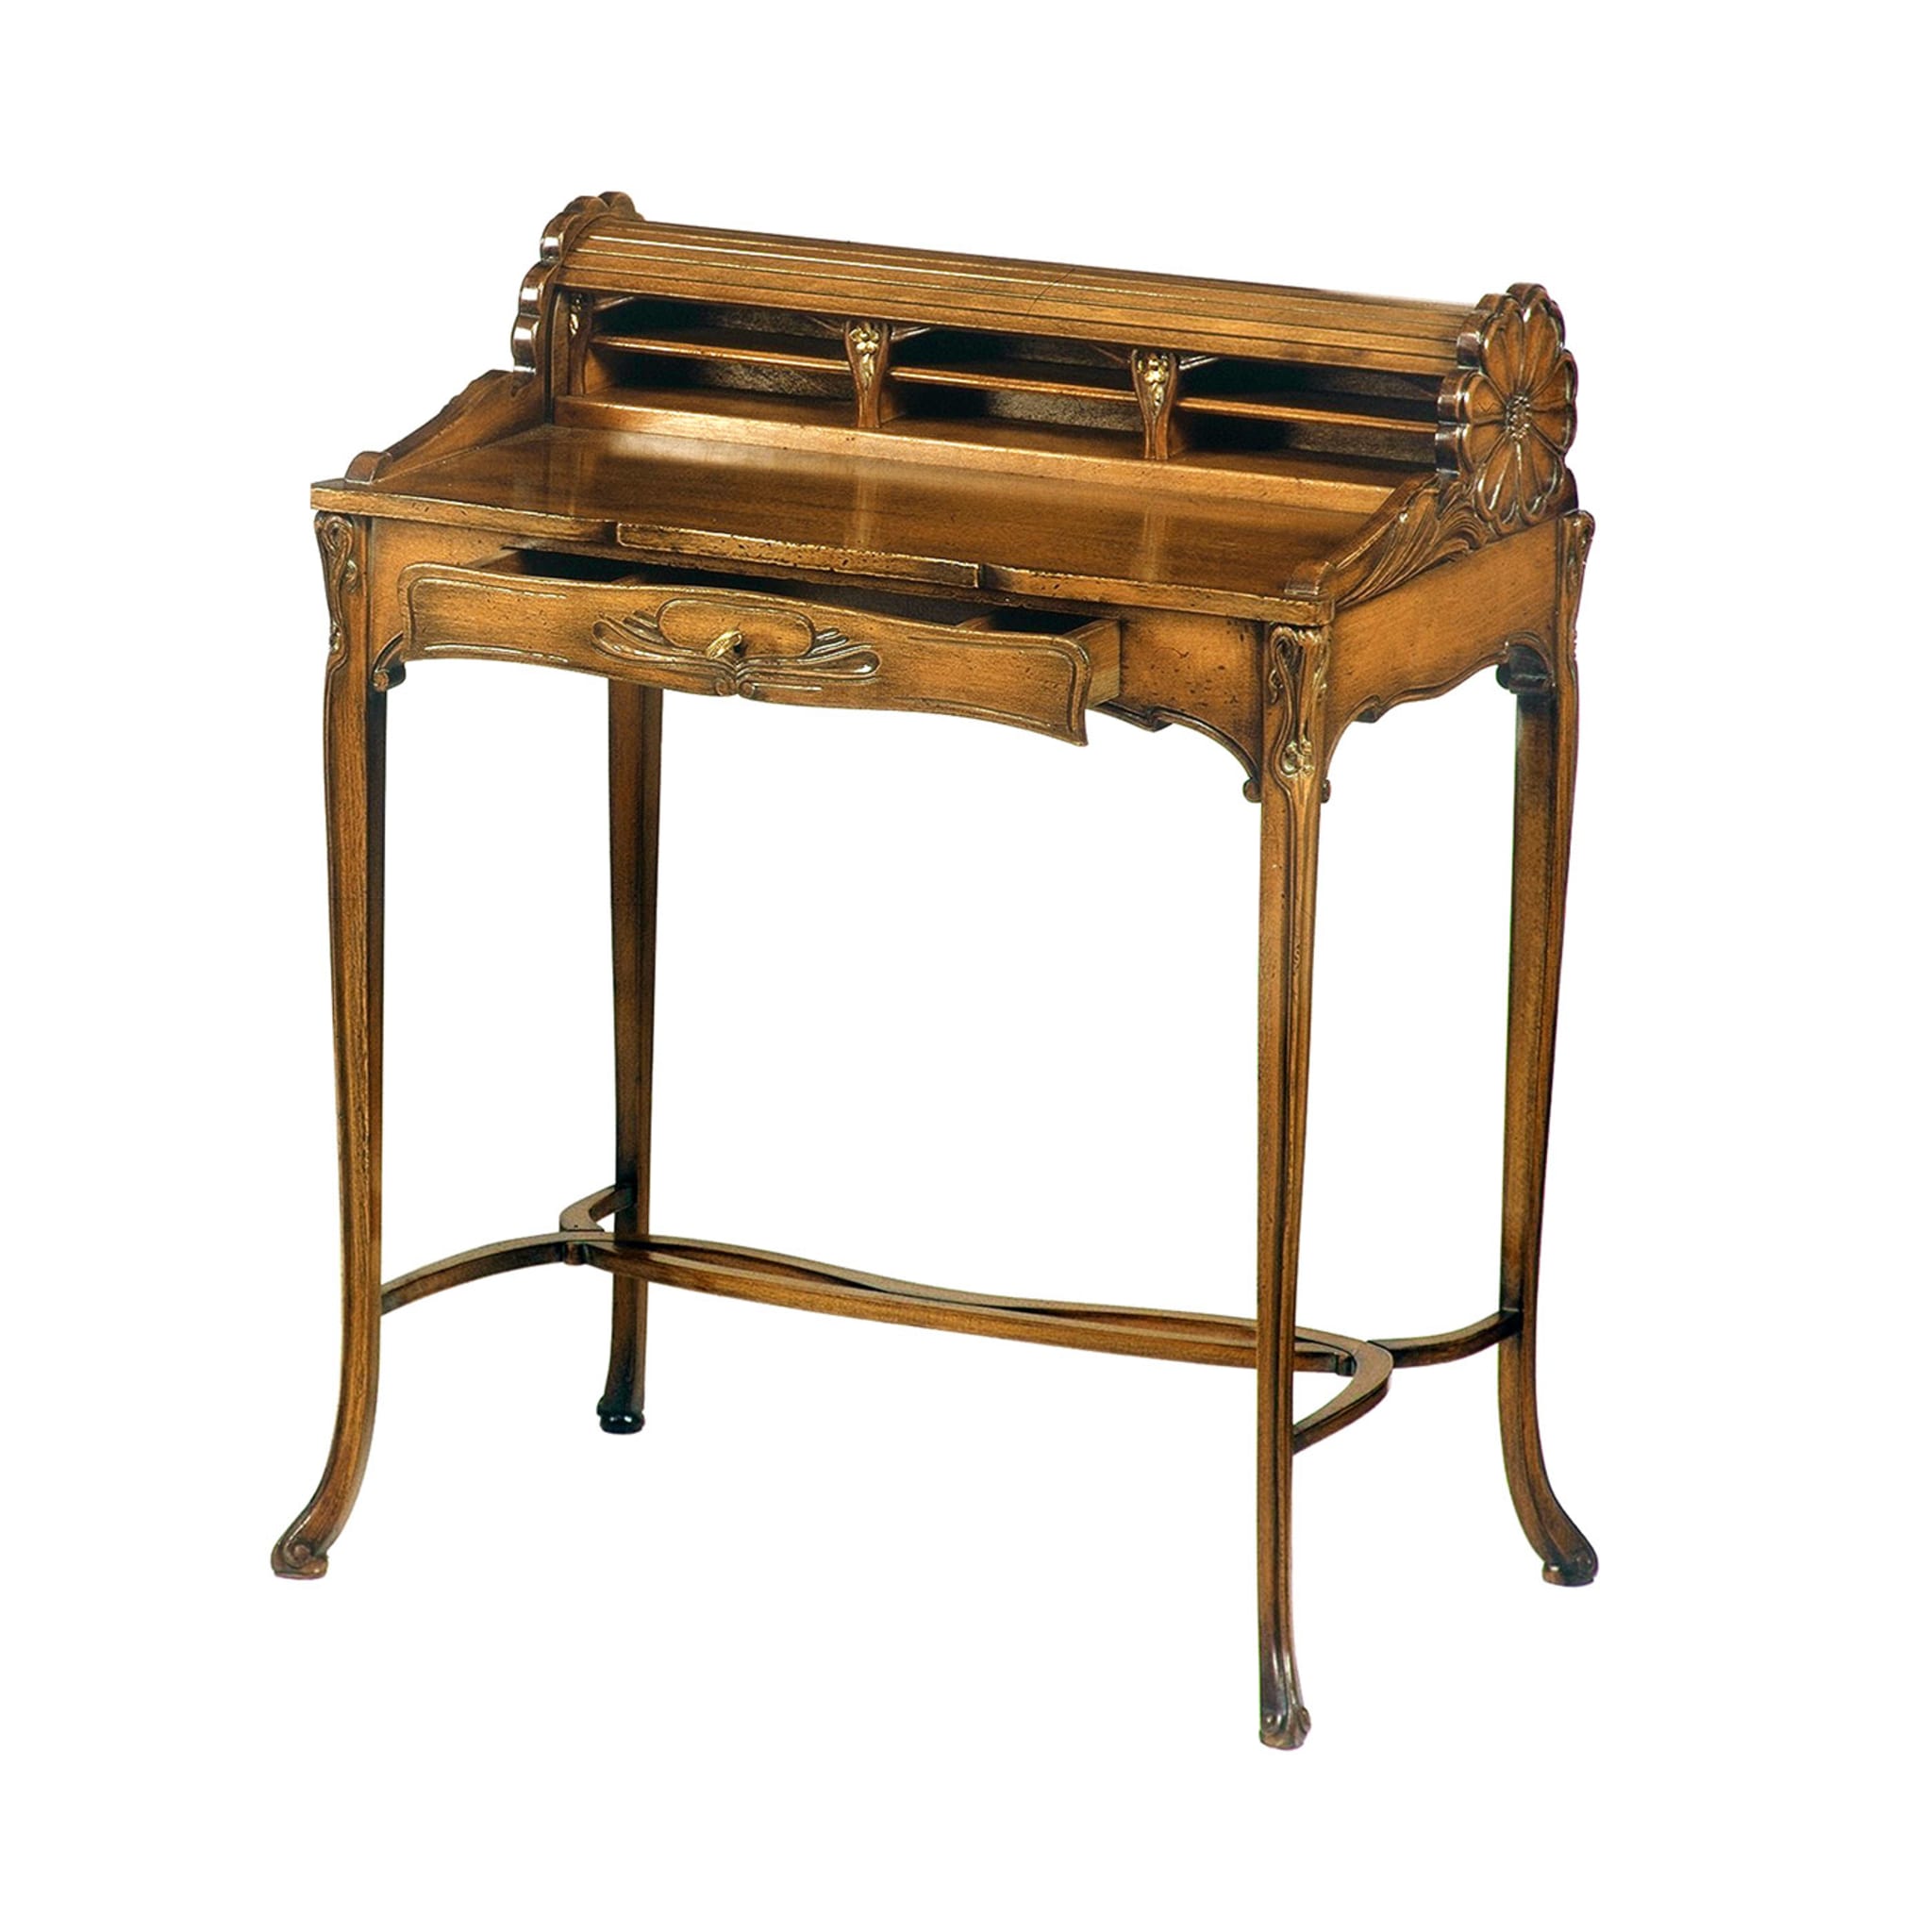 French Art Nouveau-Style Roll-Top Writing Desk - Alternative view 1